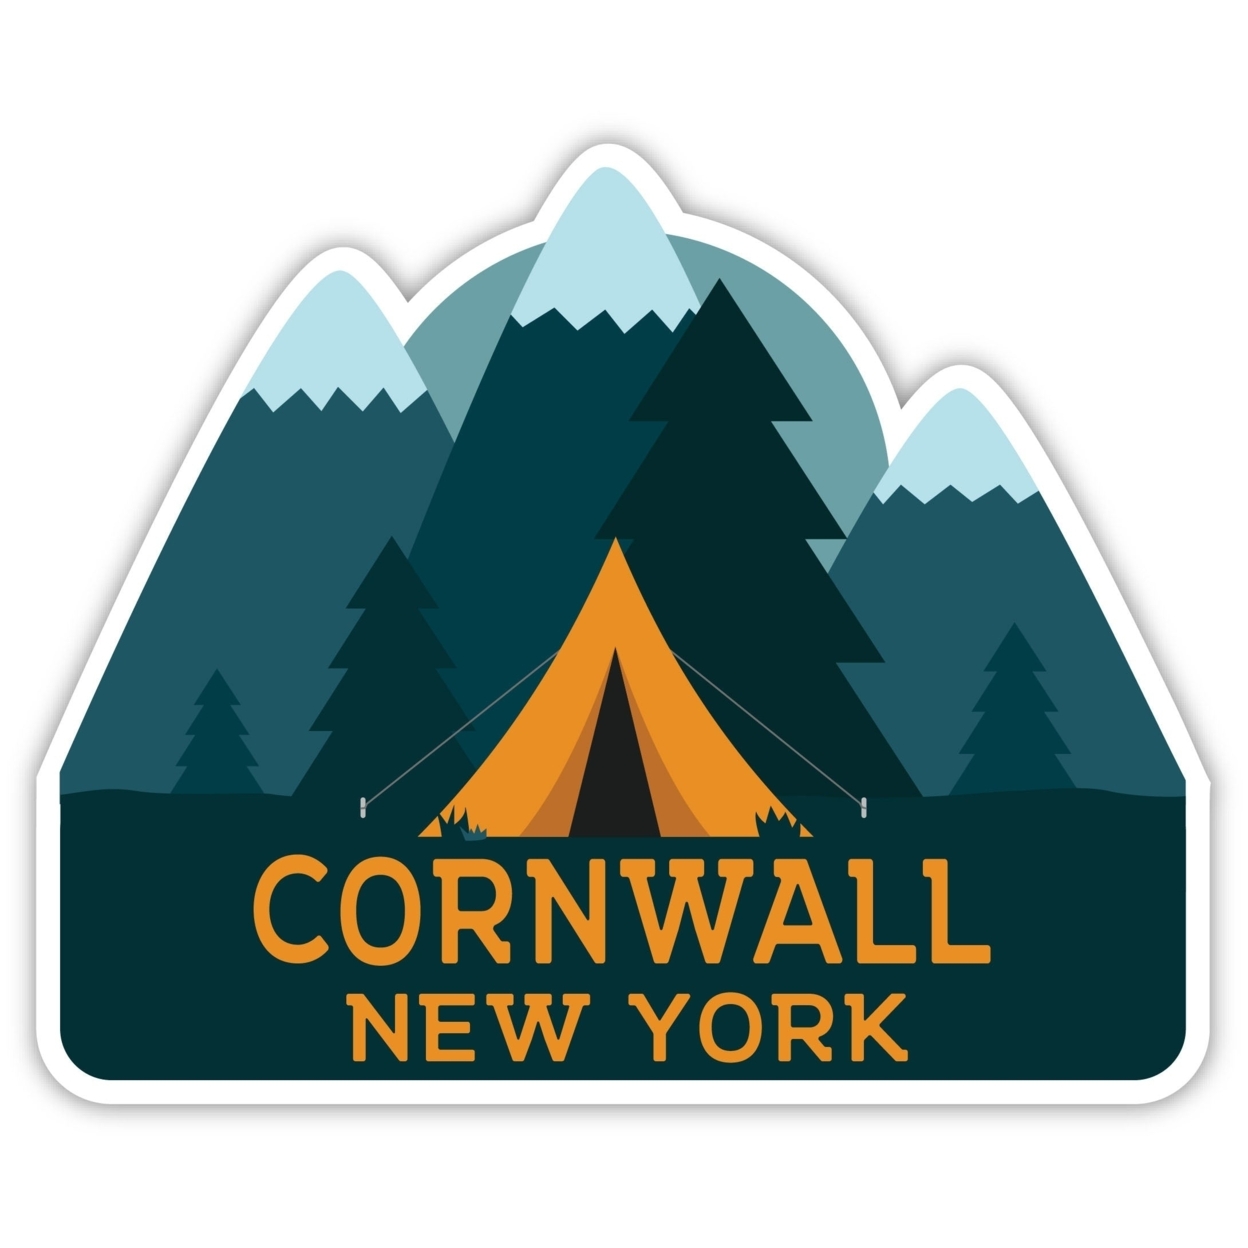 Cornwall New York Souvenir Decorative Stickers (Choose Theme And Size) - Single Unit, 4-Inch, Tent